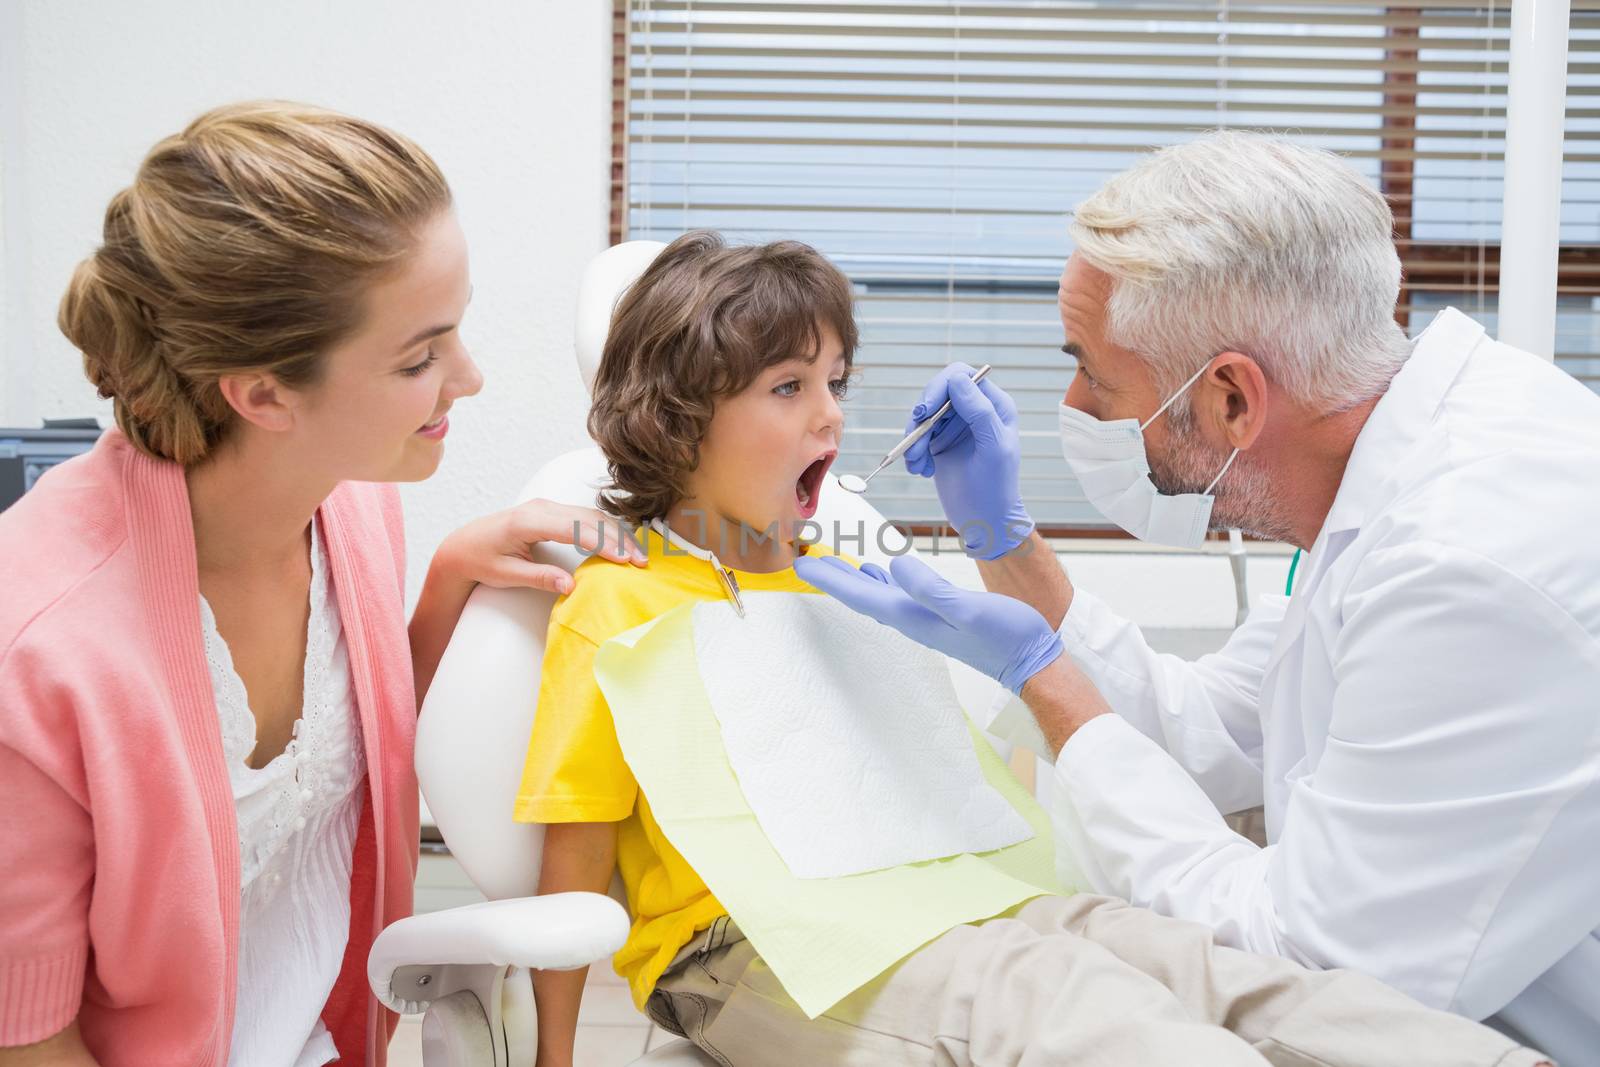 Pediatric dentist examining a little boys teeth with his mother watching  by Wavebreakmedia